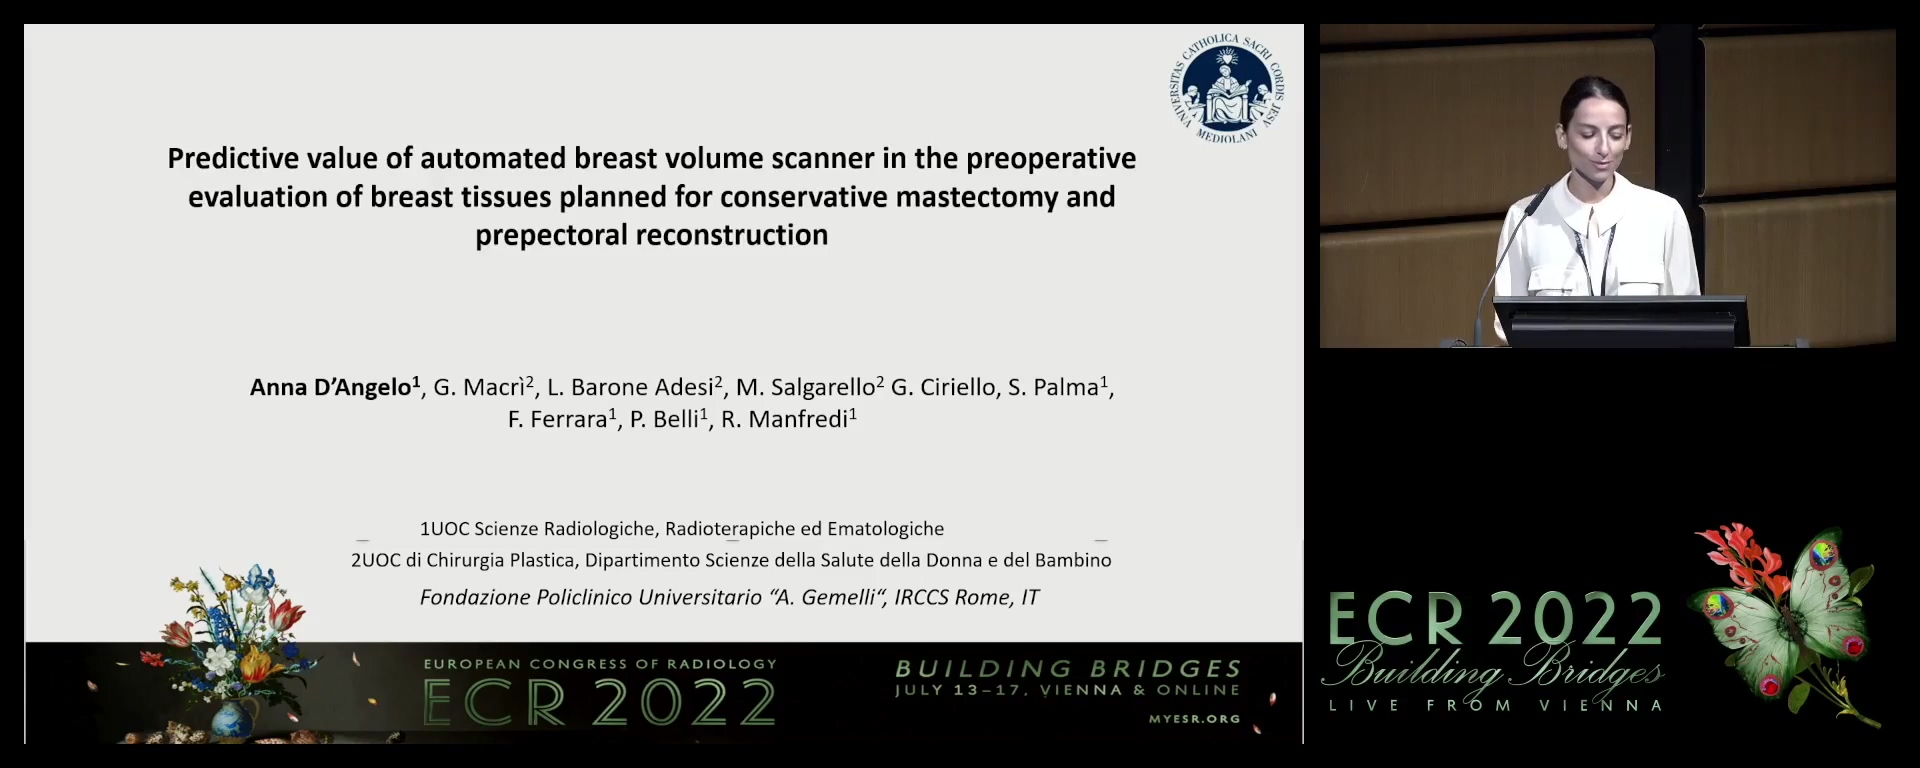 Predictive value of automated breast volume scanner in the preoperative evaluation of breast tissues planned for conservative mastectomy and prepectoral reconstruction